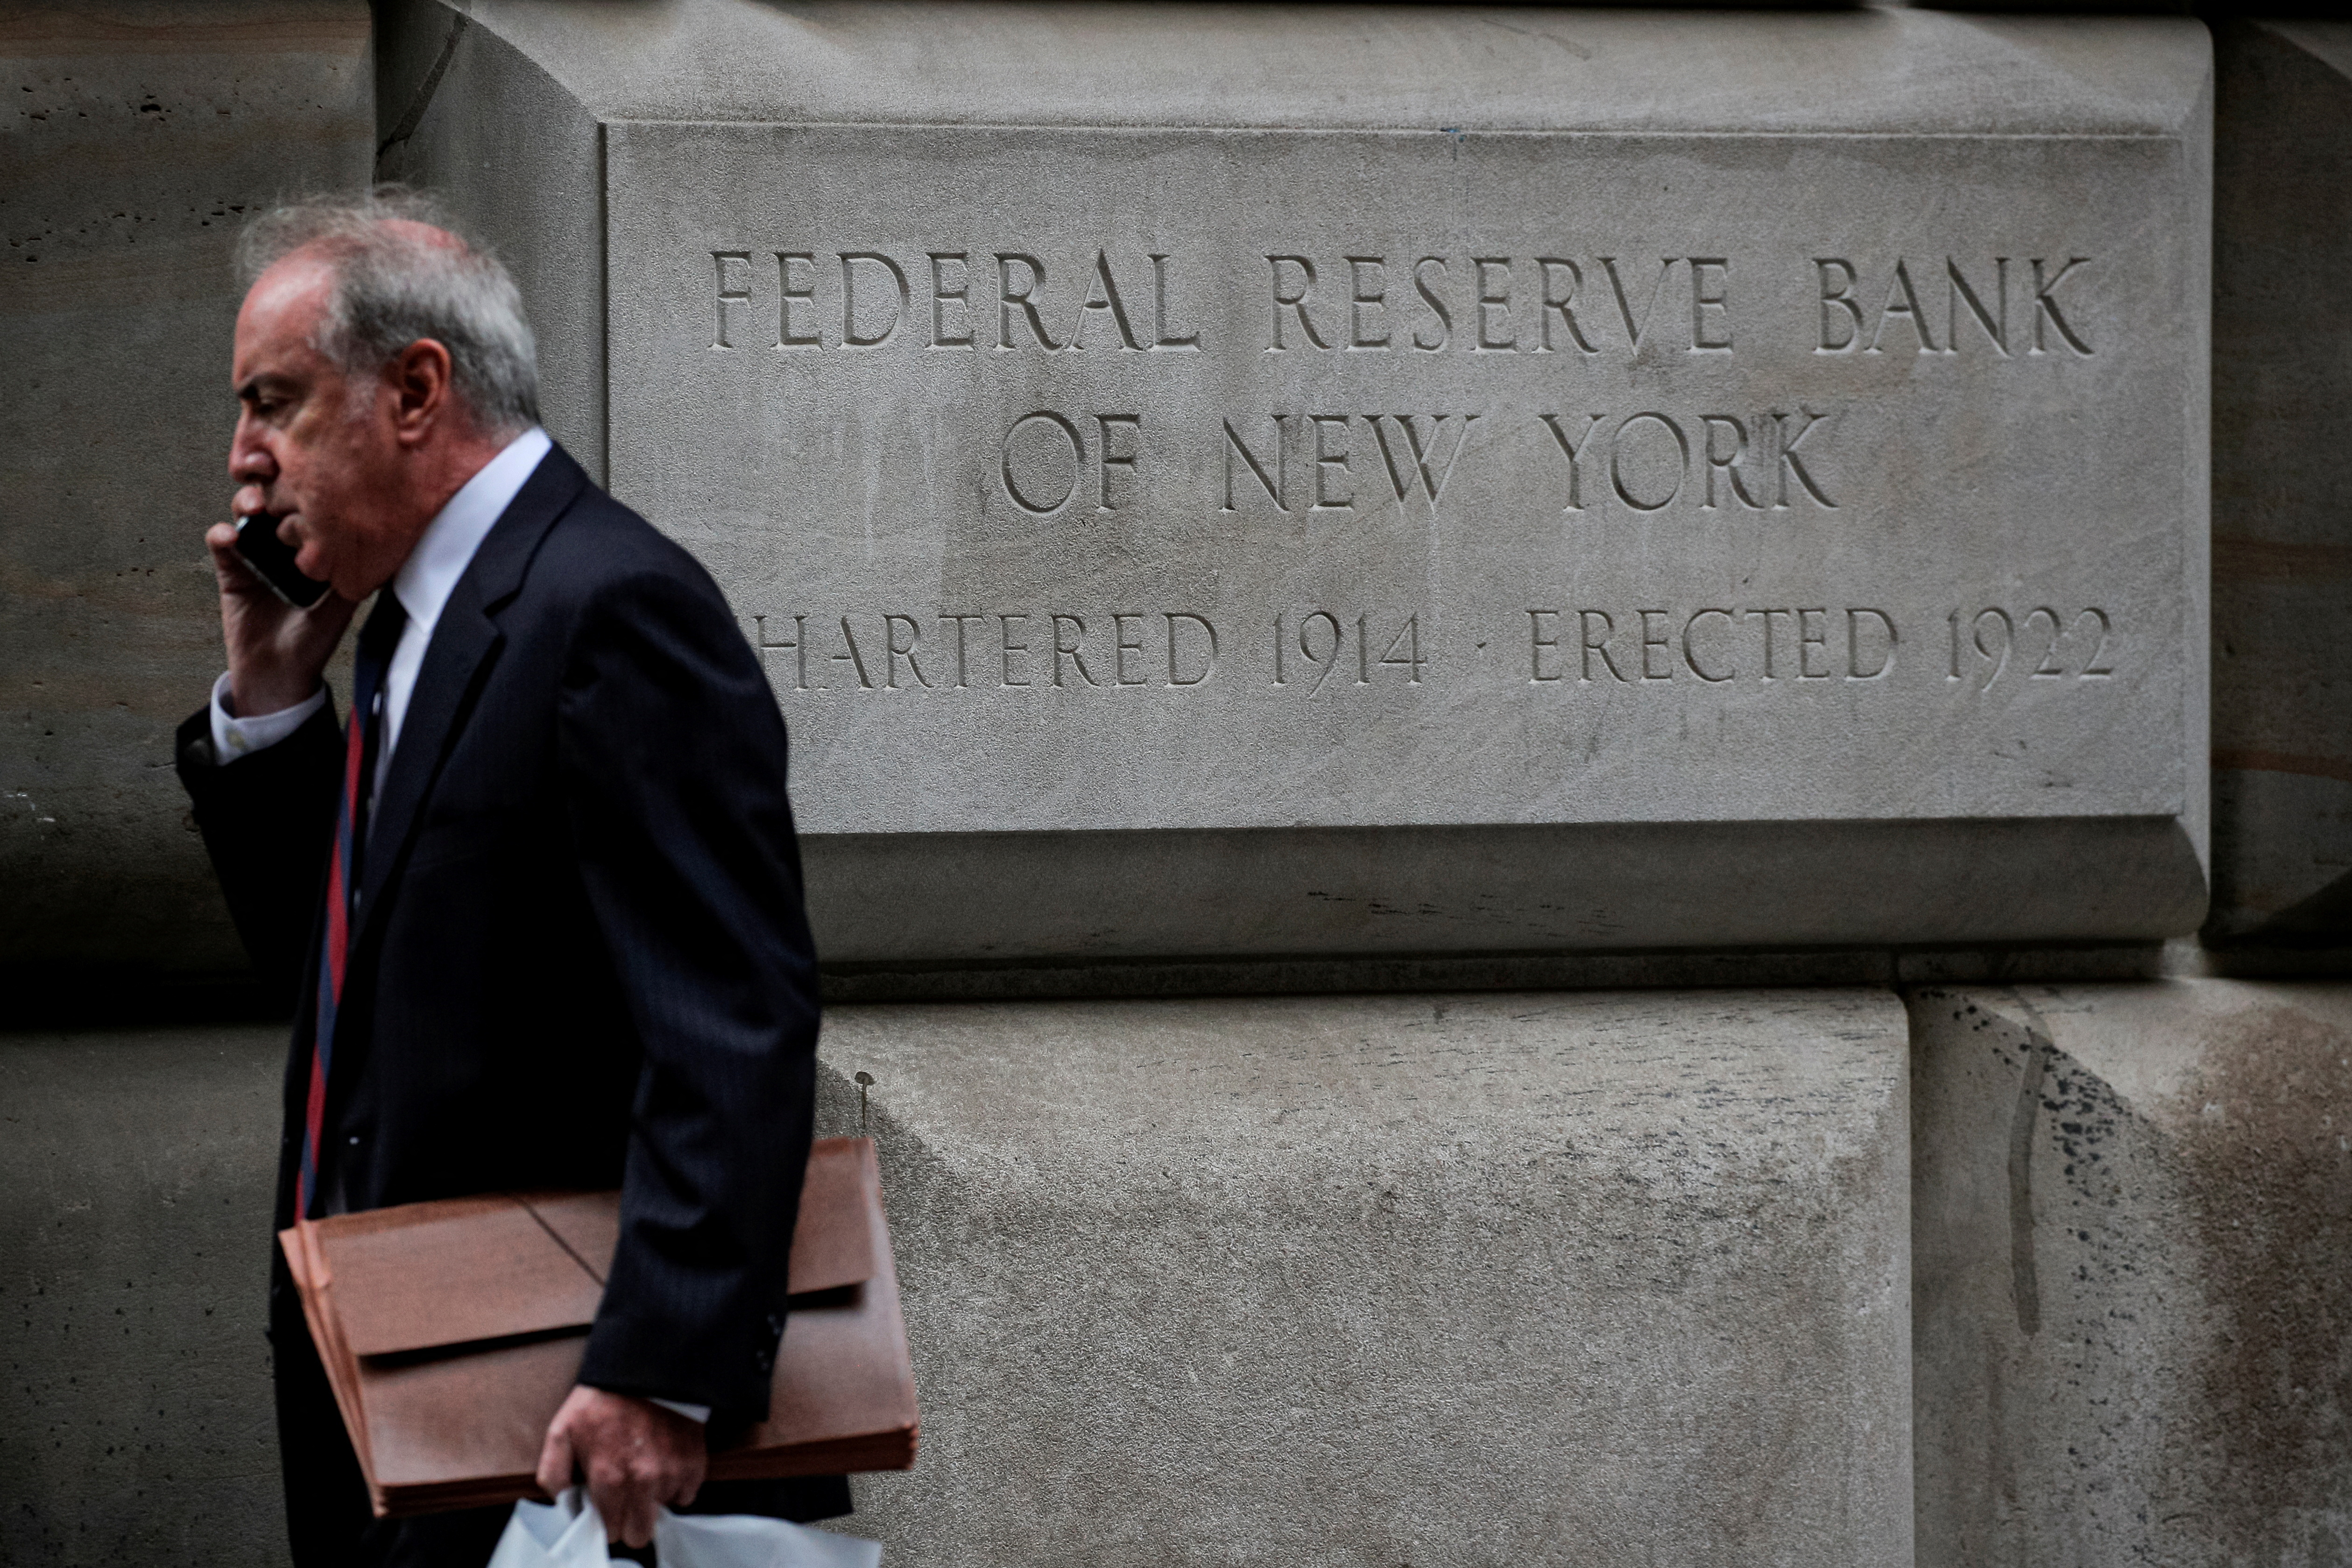  The Federal Reserve Bank of New York